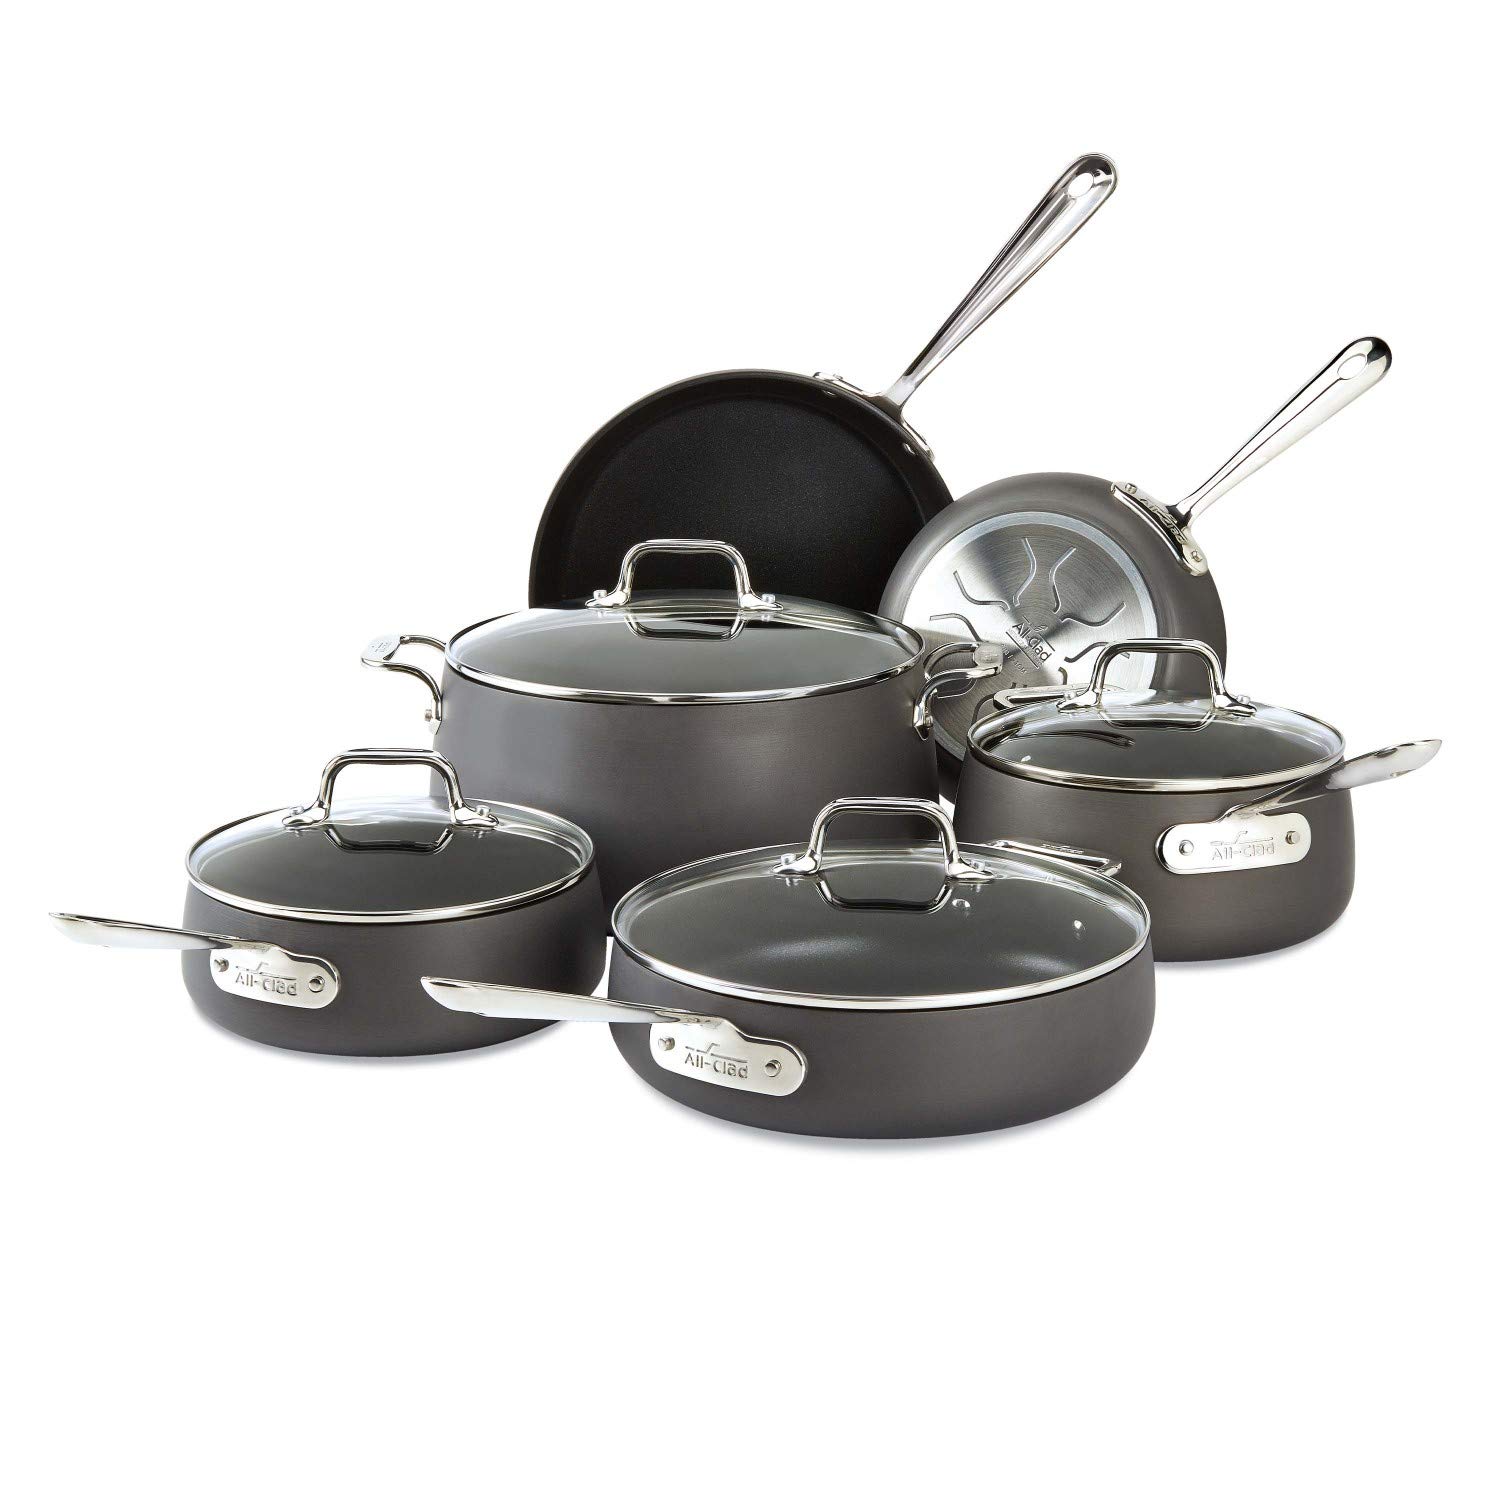 10-Piece All-Clad HA1 Hard Anodized Nonstick Cookware Set $300 + Free Shipping